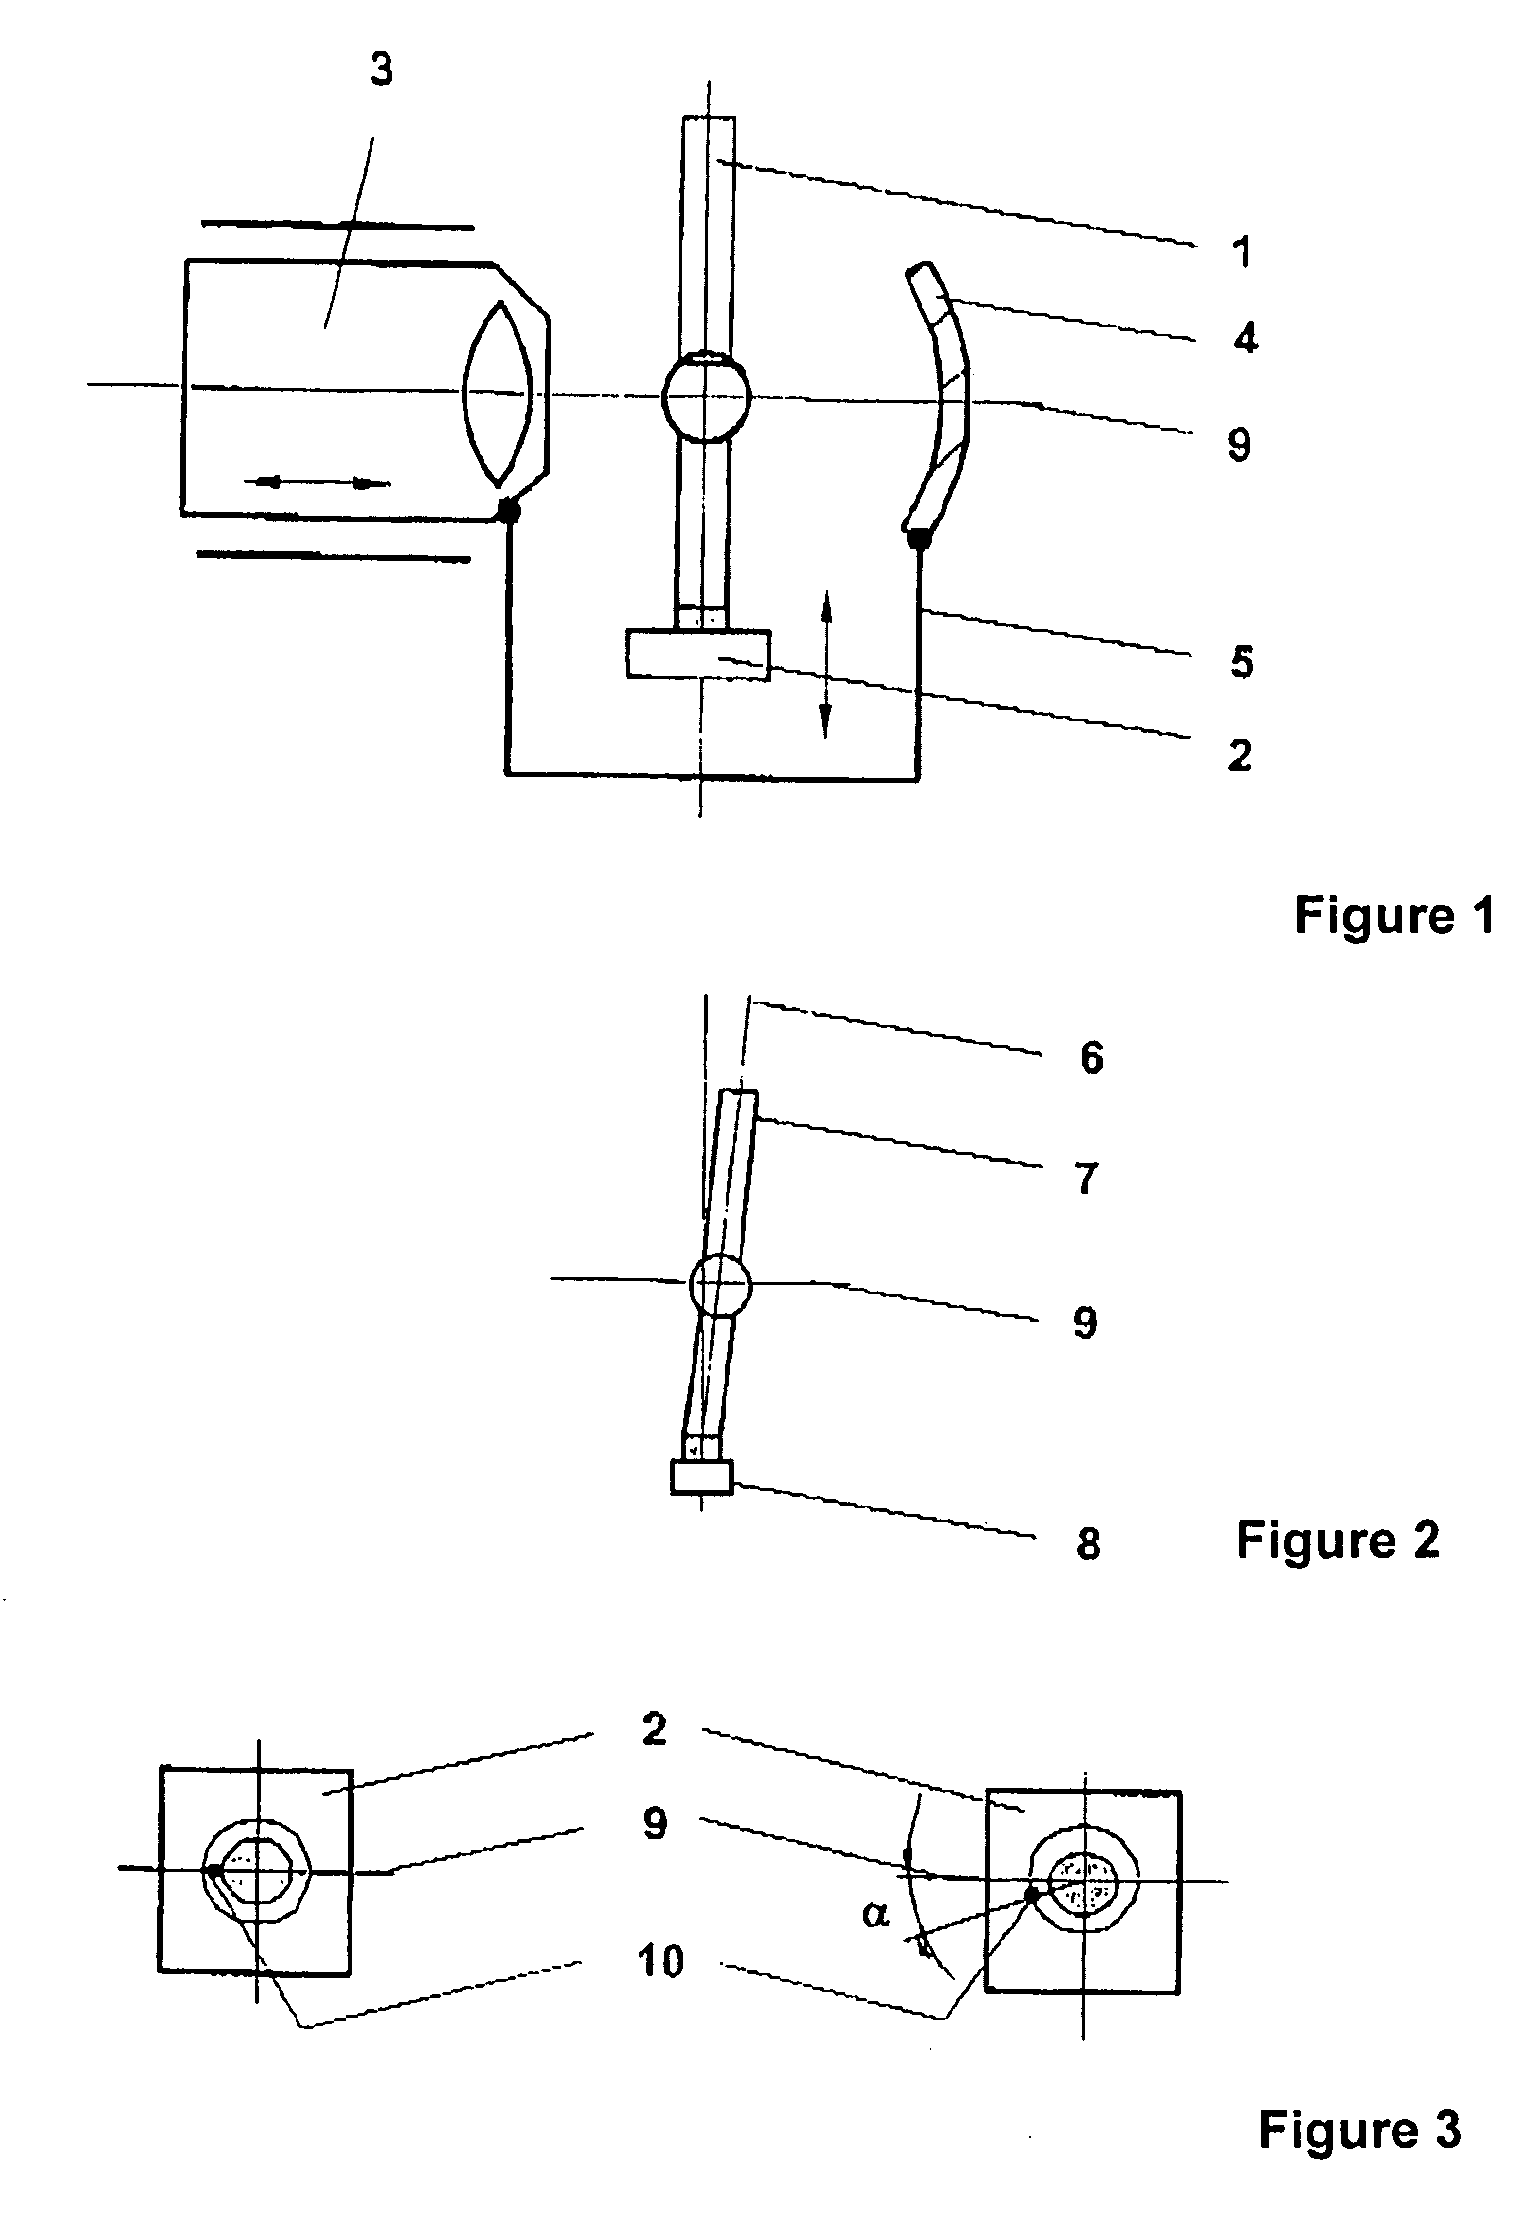 Method and apparatus for adjustment and automatic readjustment of the lamp in a microscope